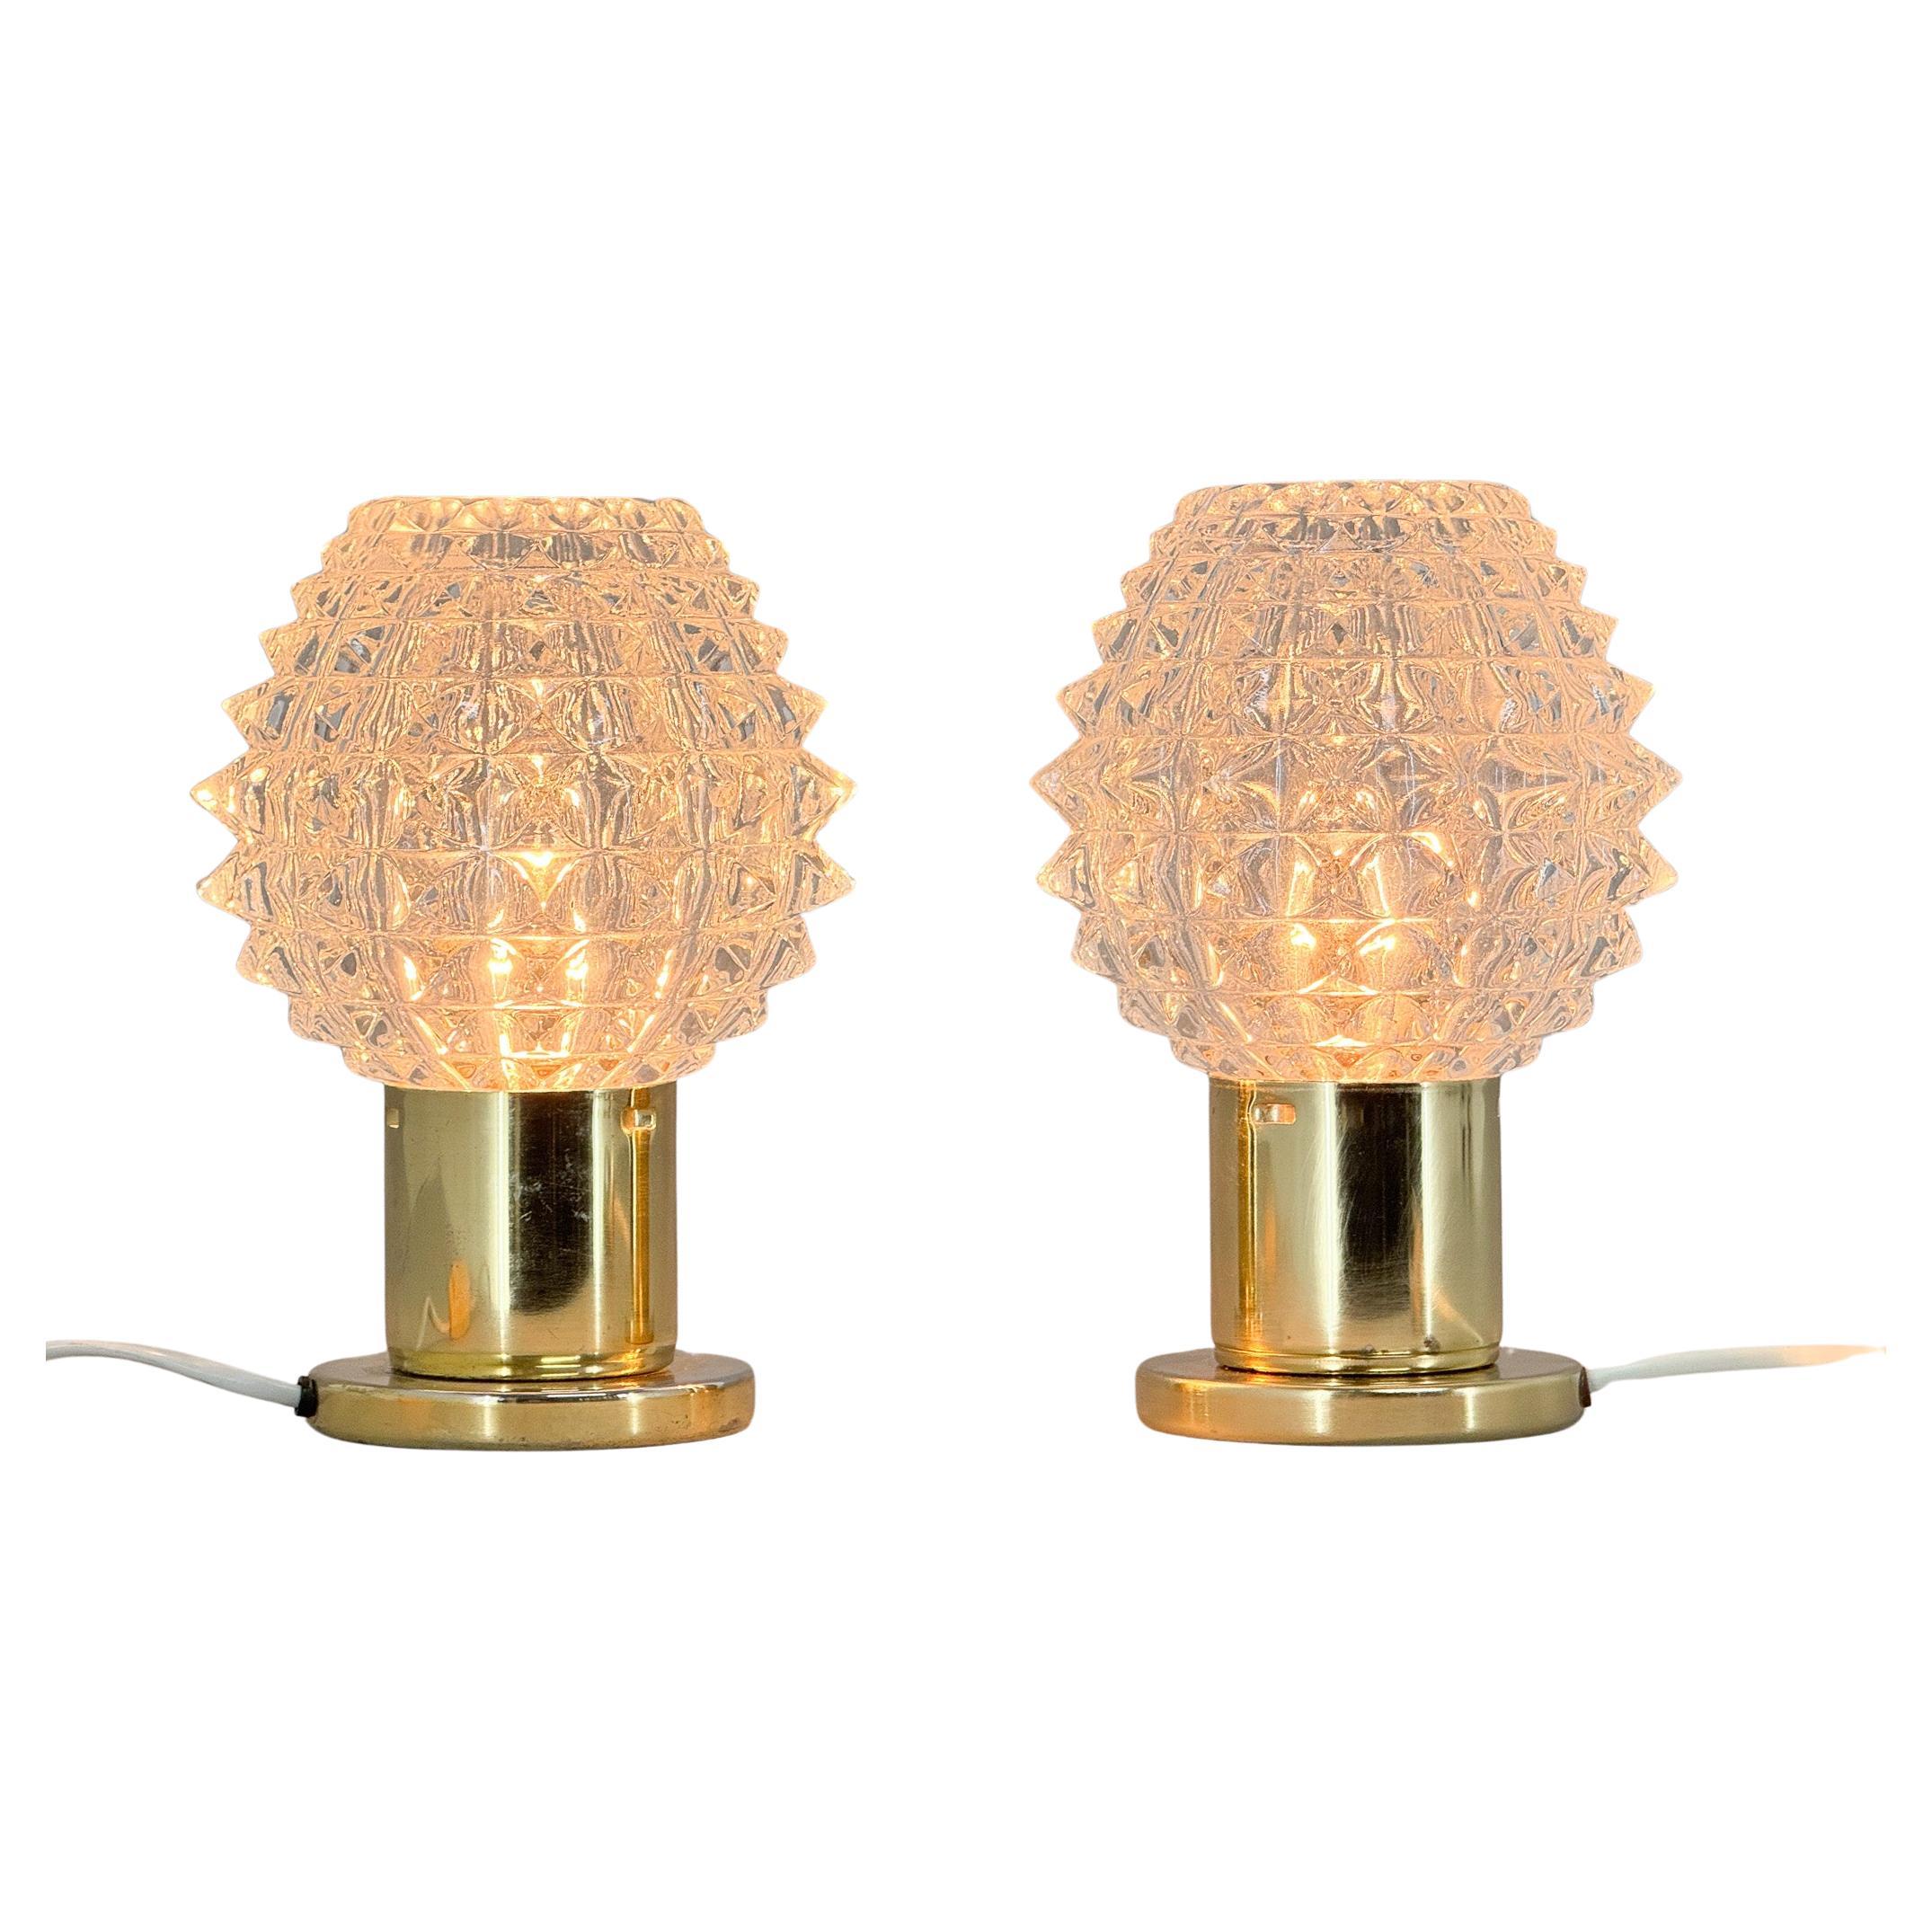 Pair of Brass and Glass Table Lamps by Kamenicky Senov, 1970s